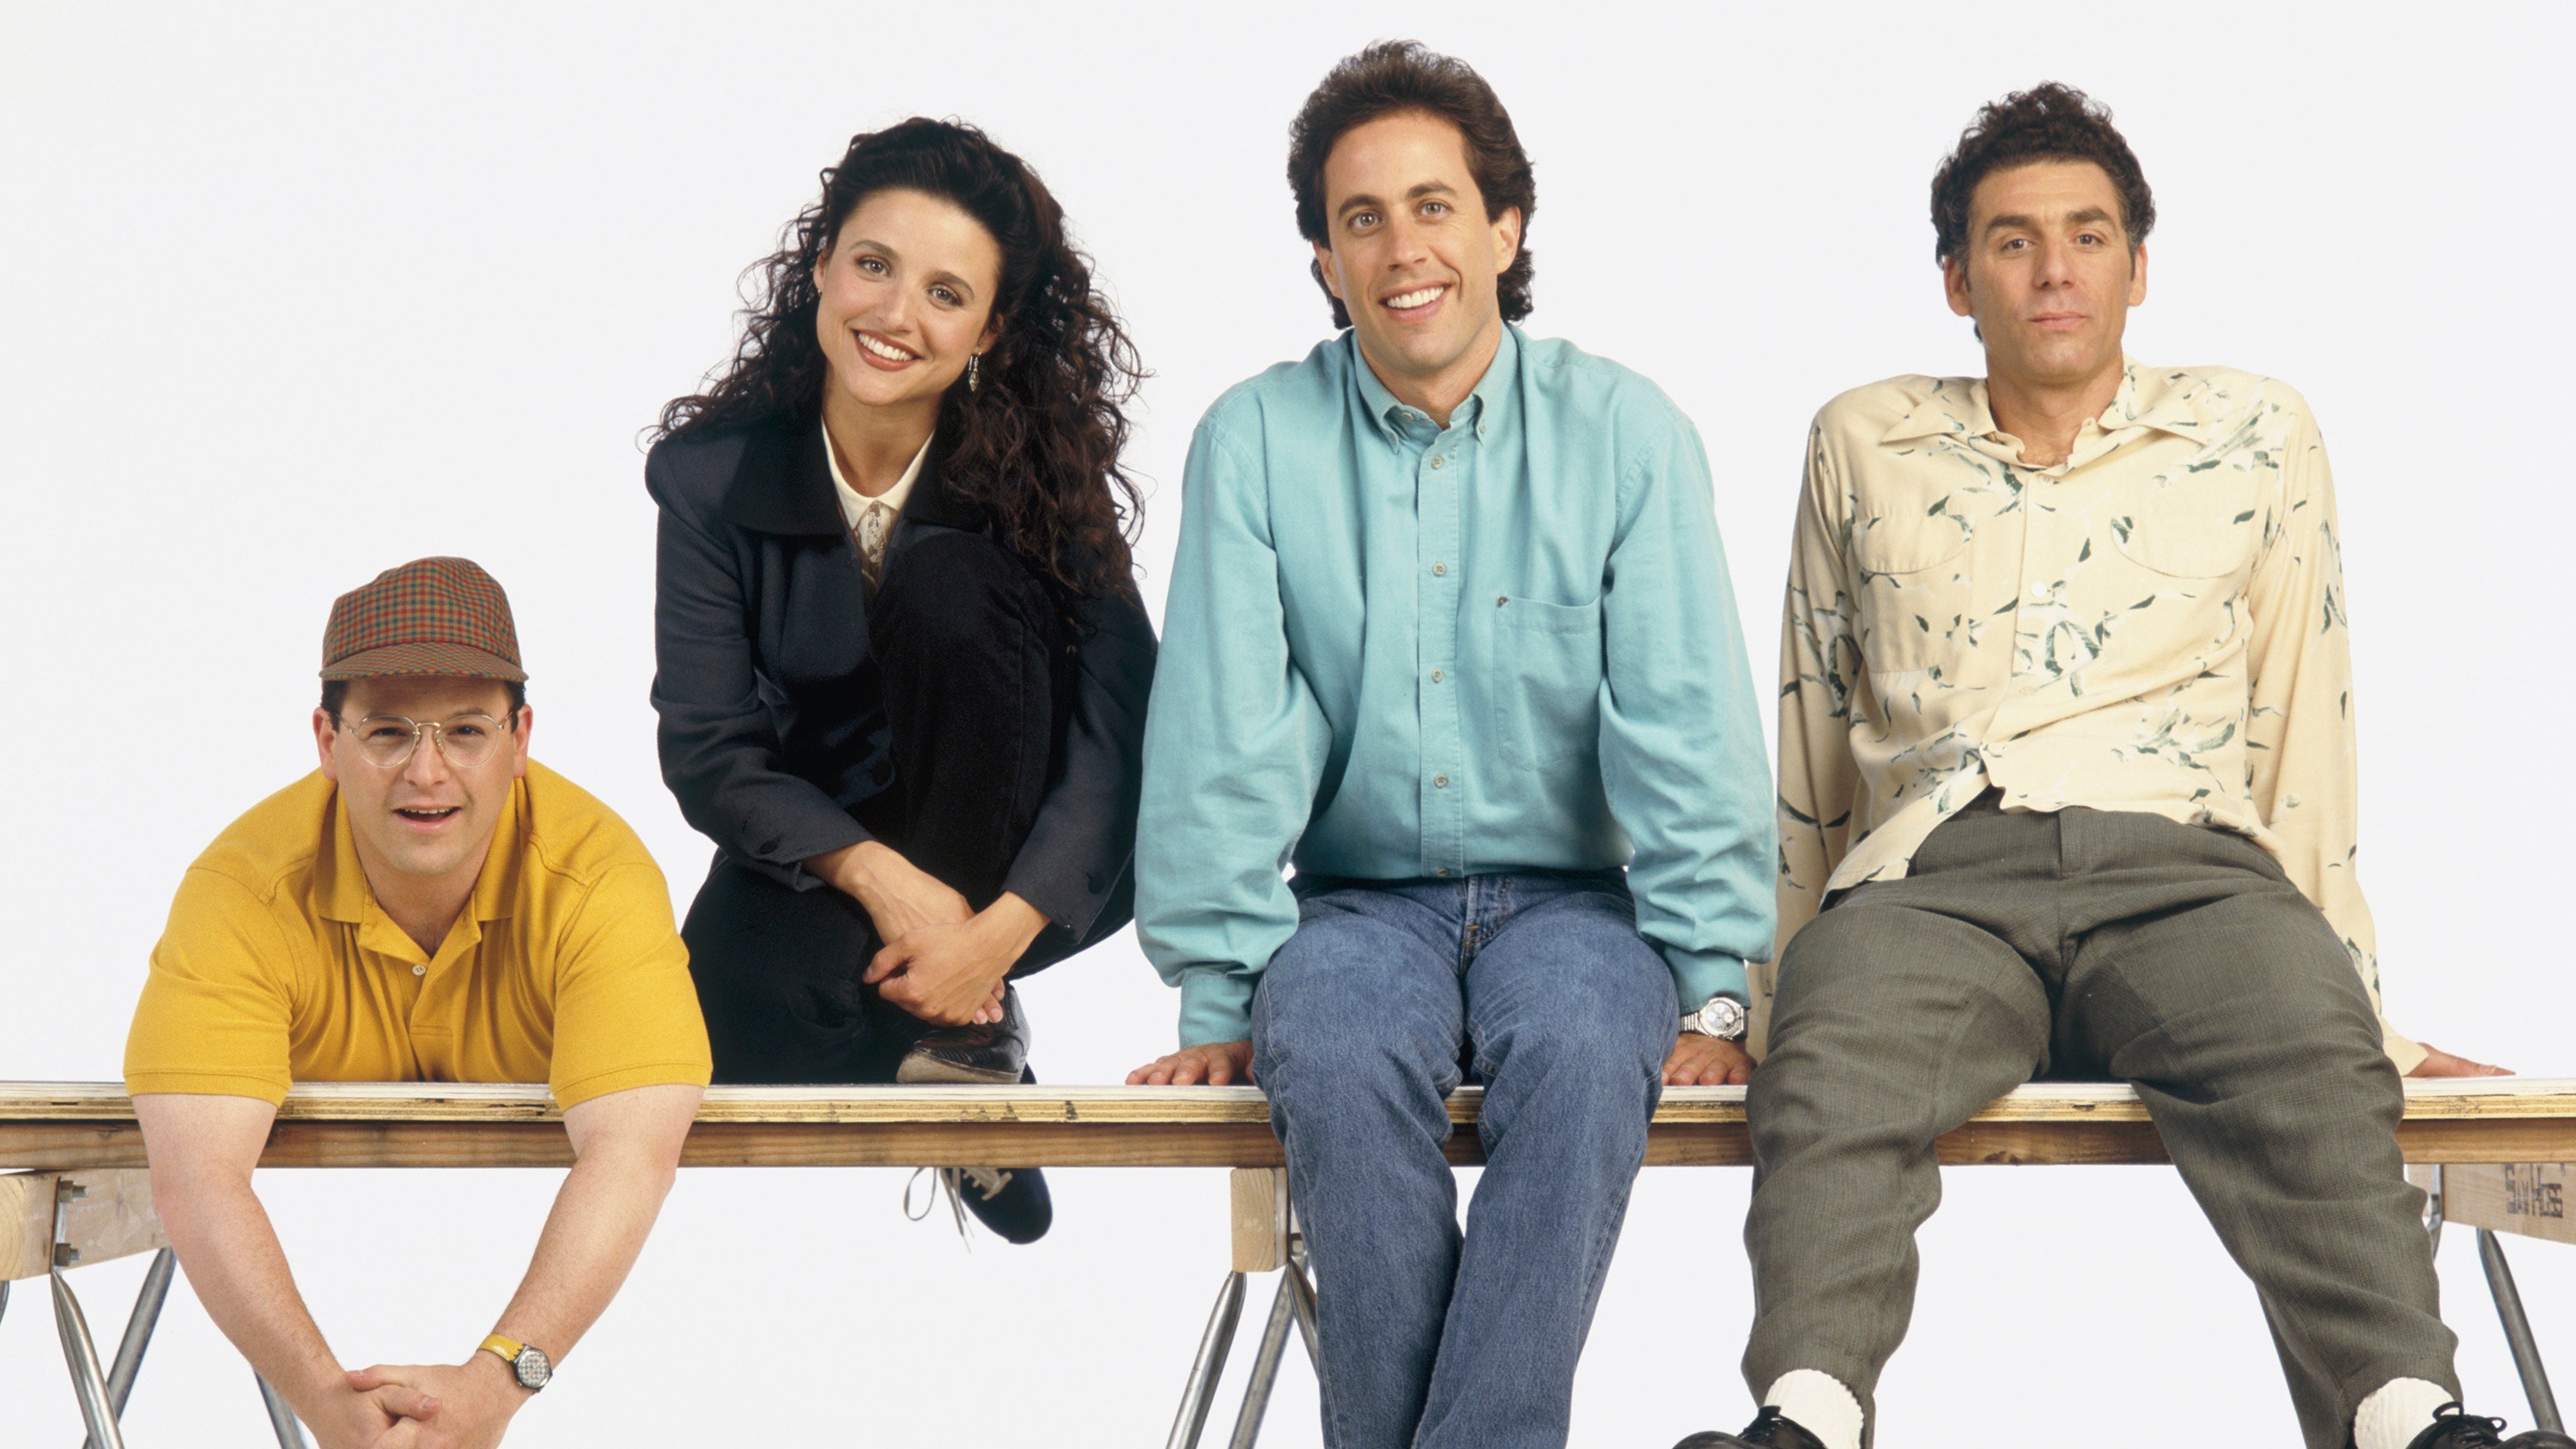 Where is the 'Seinfeld' cast now?